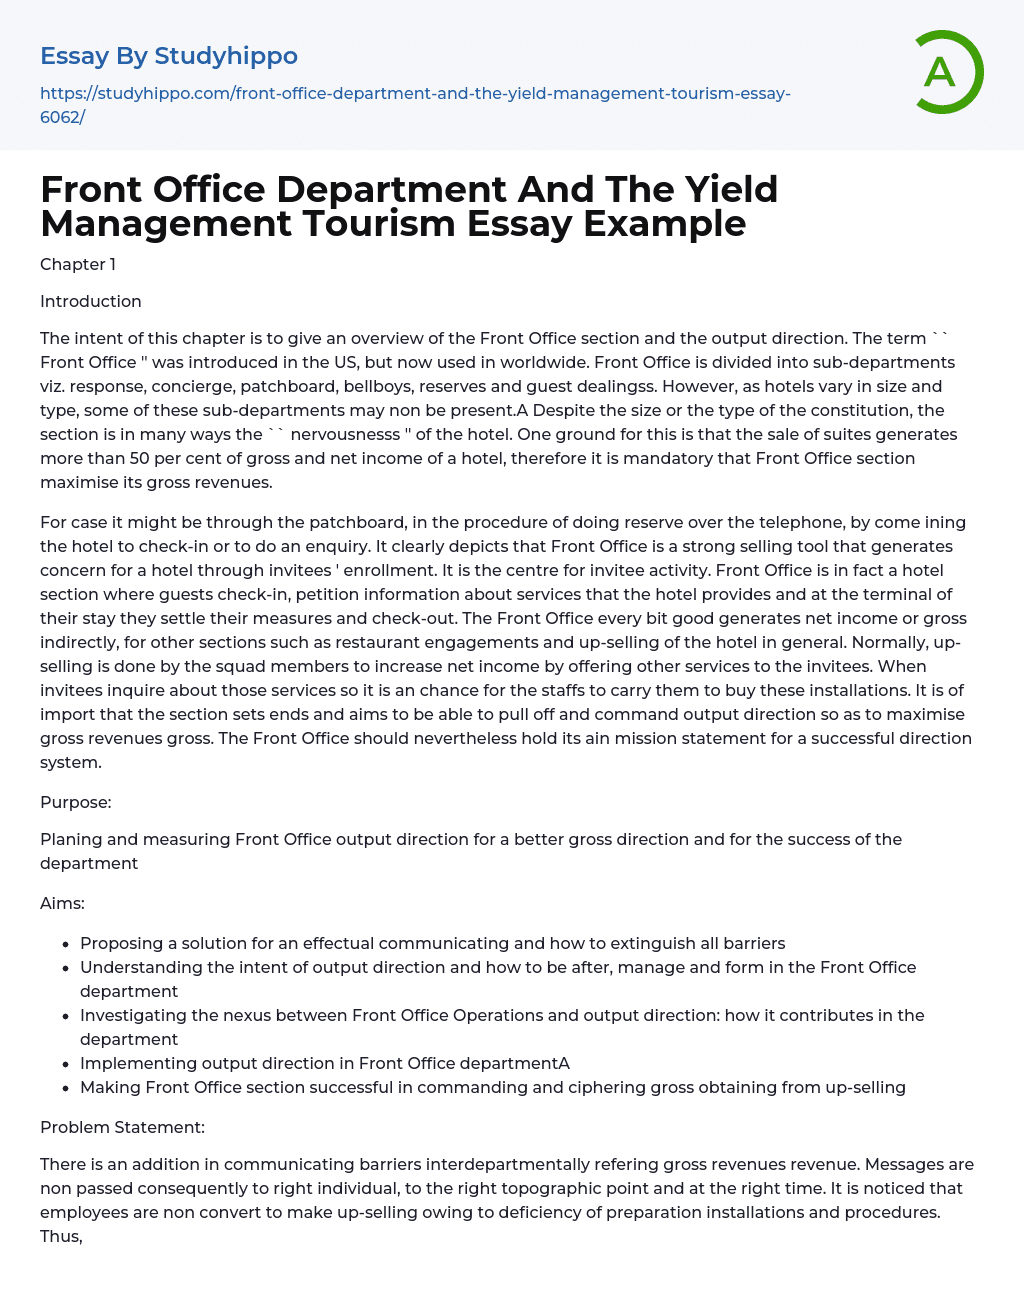 Front Office Department And The Yield Management Tourism Essay Example